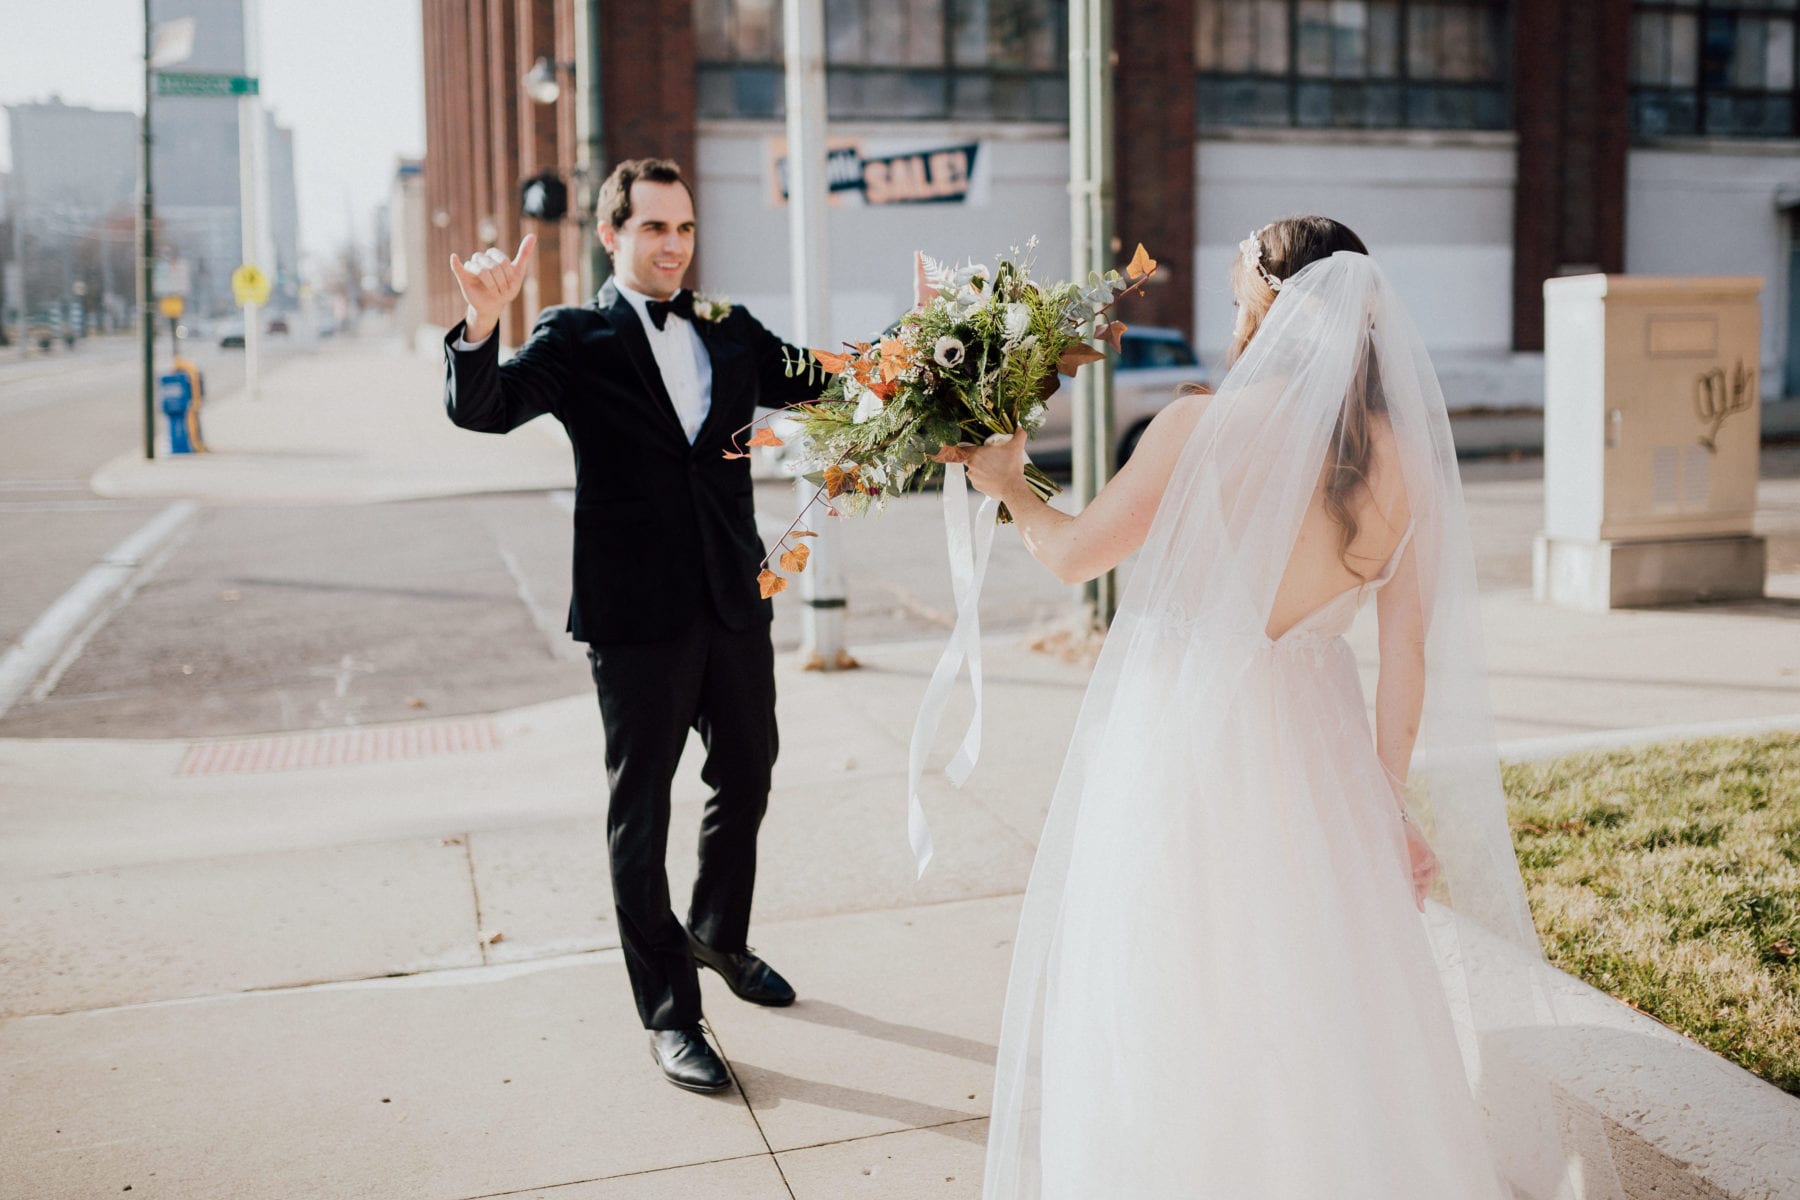 Bride and groom high five on street